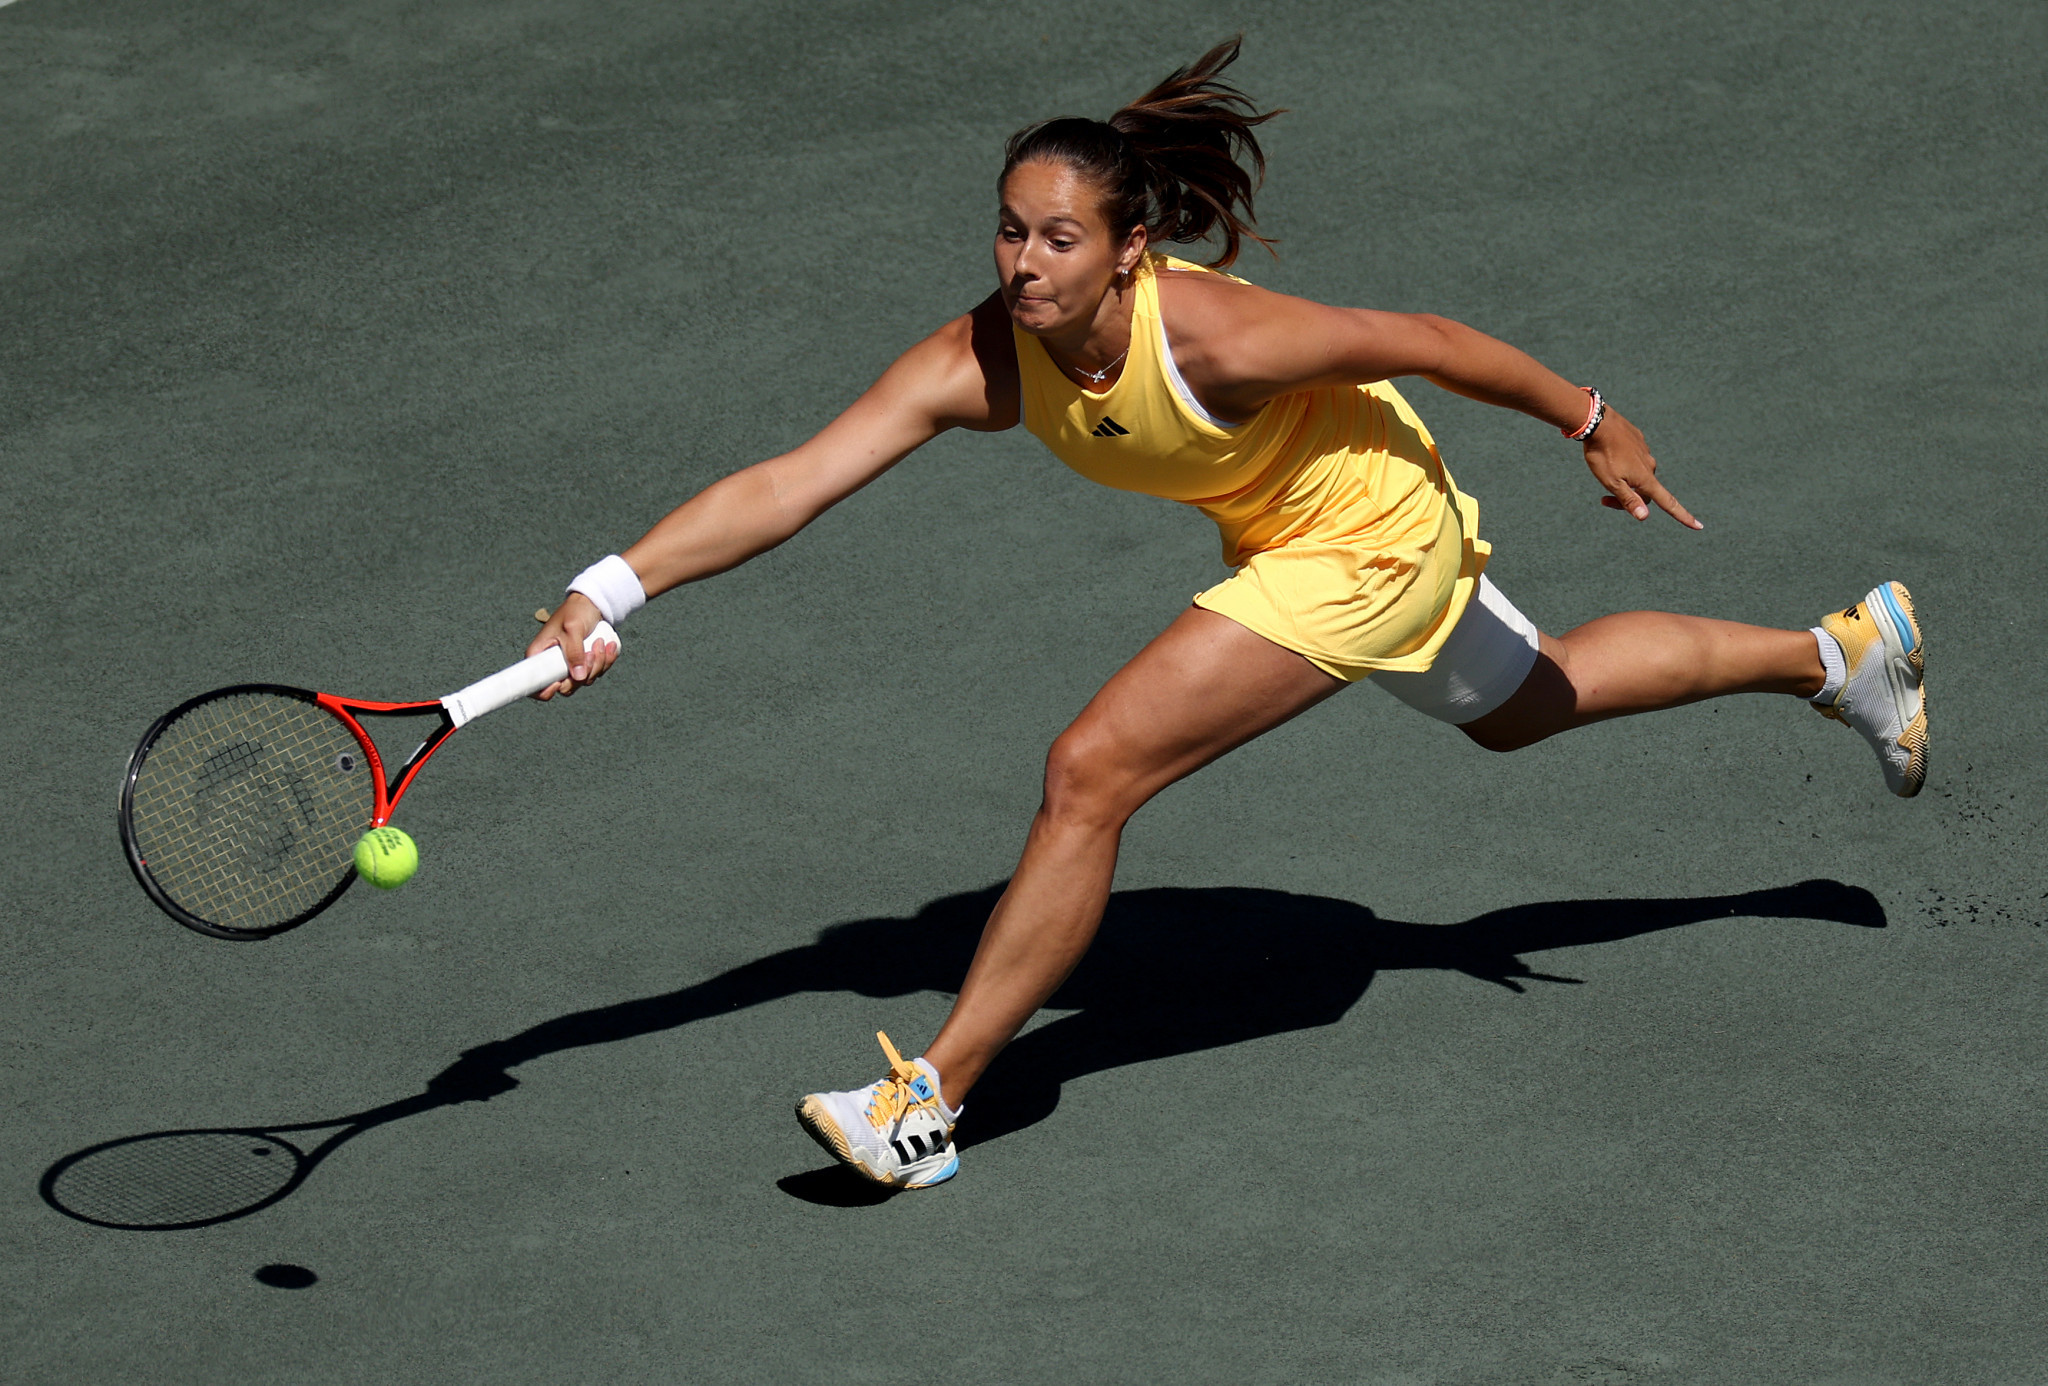 Kasatkina has been reassured over her safety when playing in Saudi Arabia. GETTY IMAGES